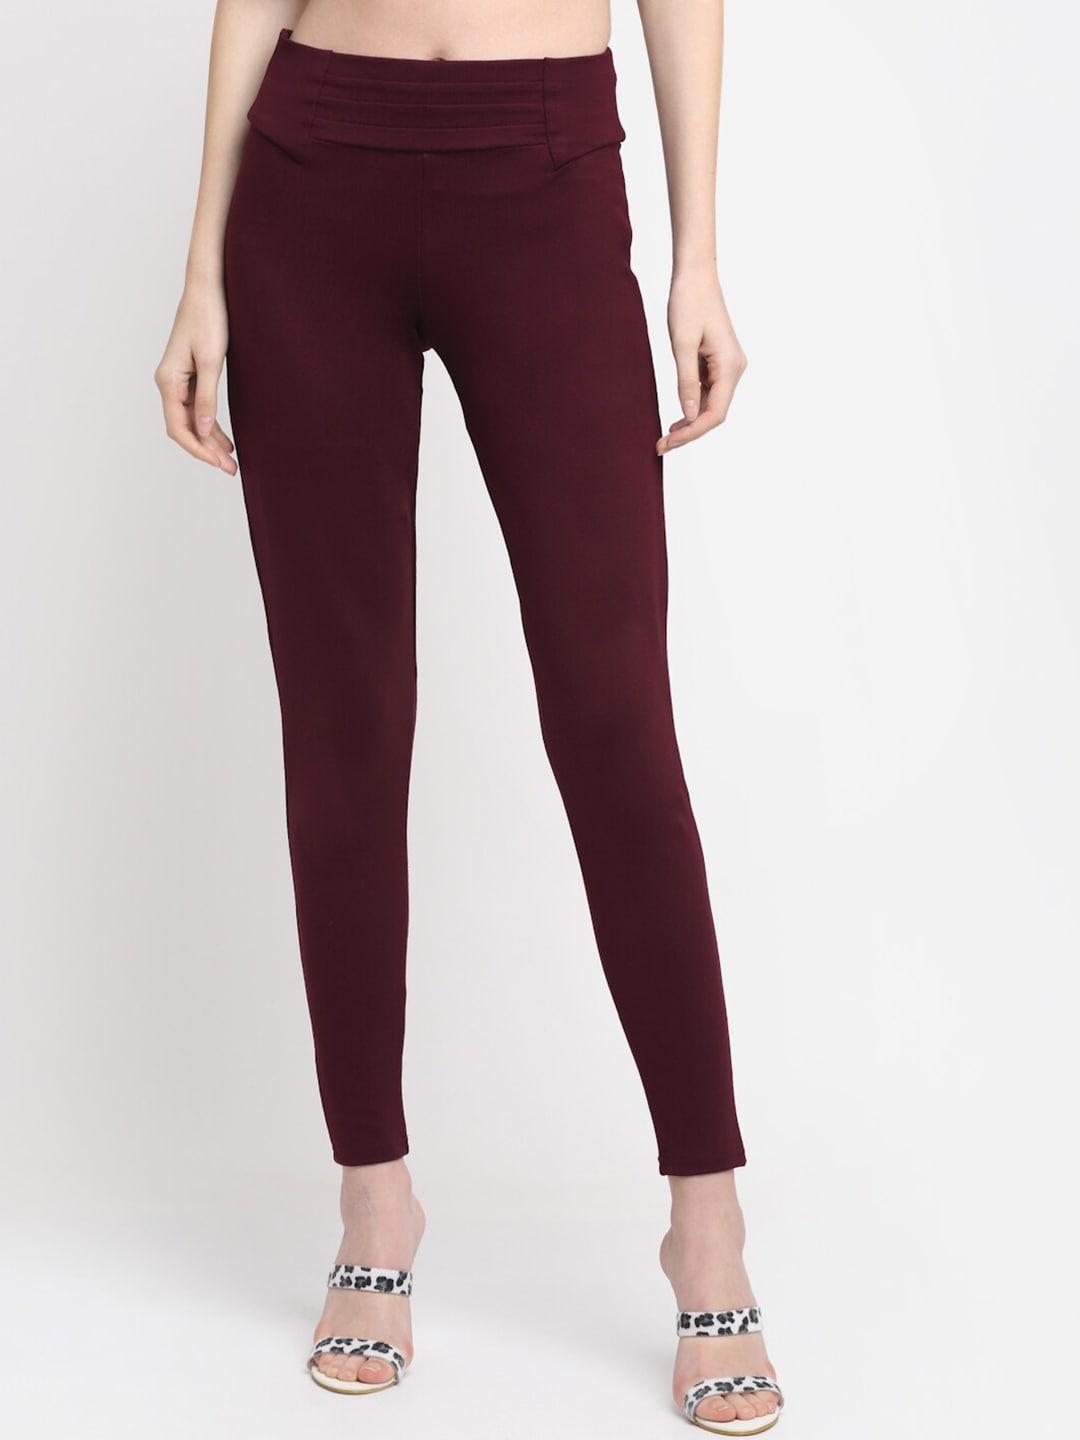 cantabil-women-wine-solid-cotton-jeggings